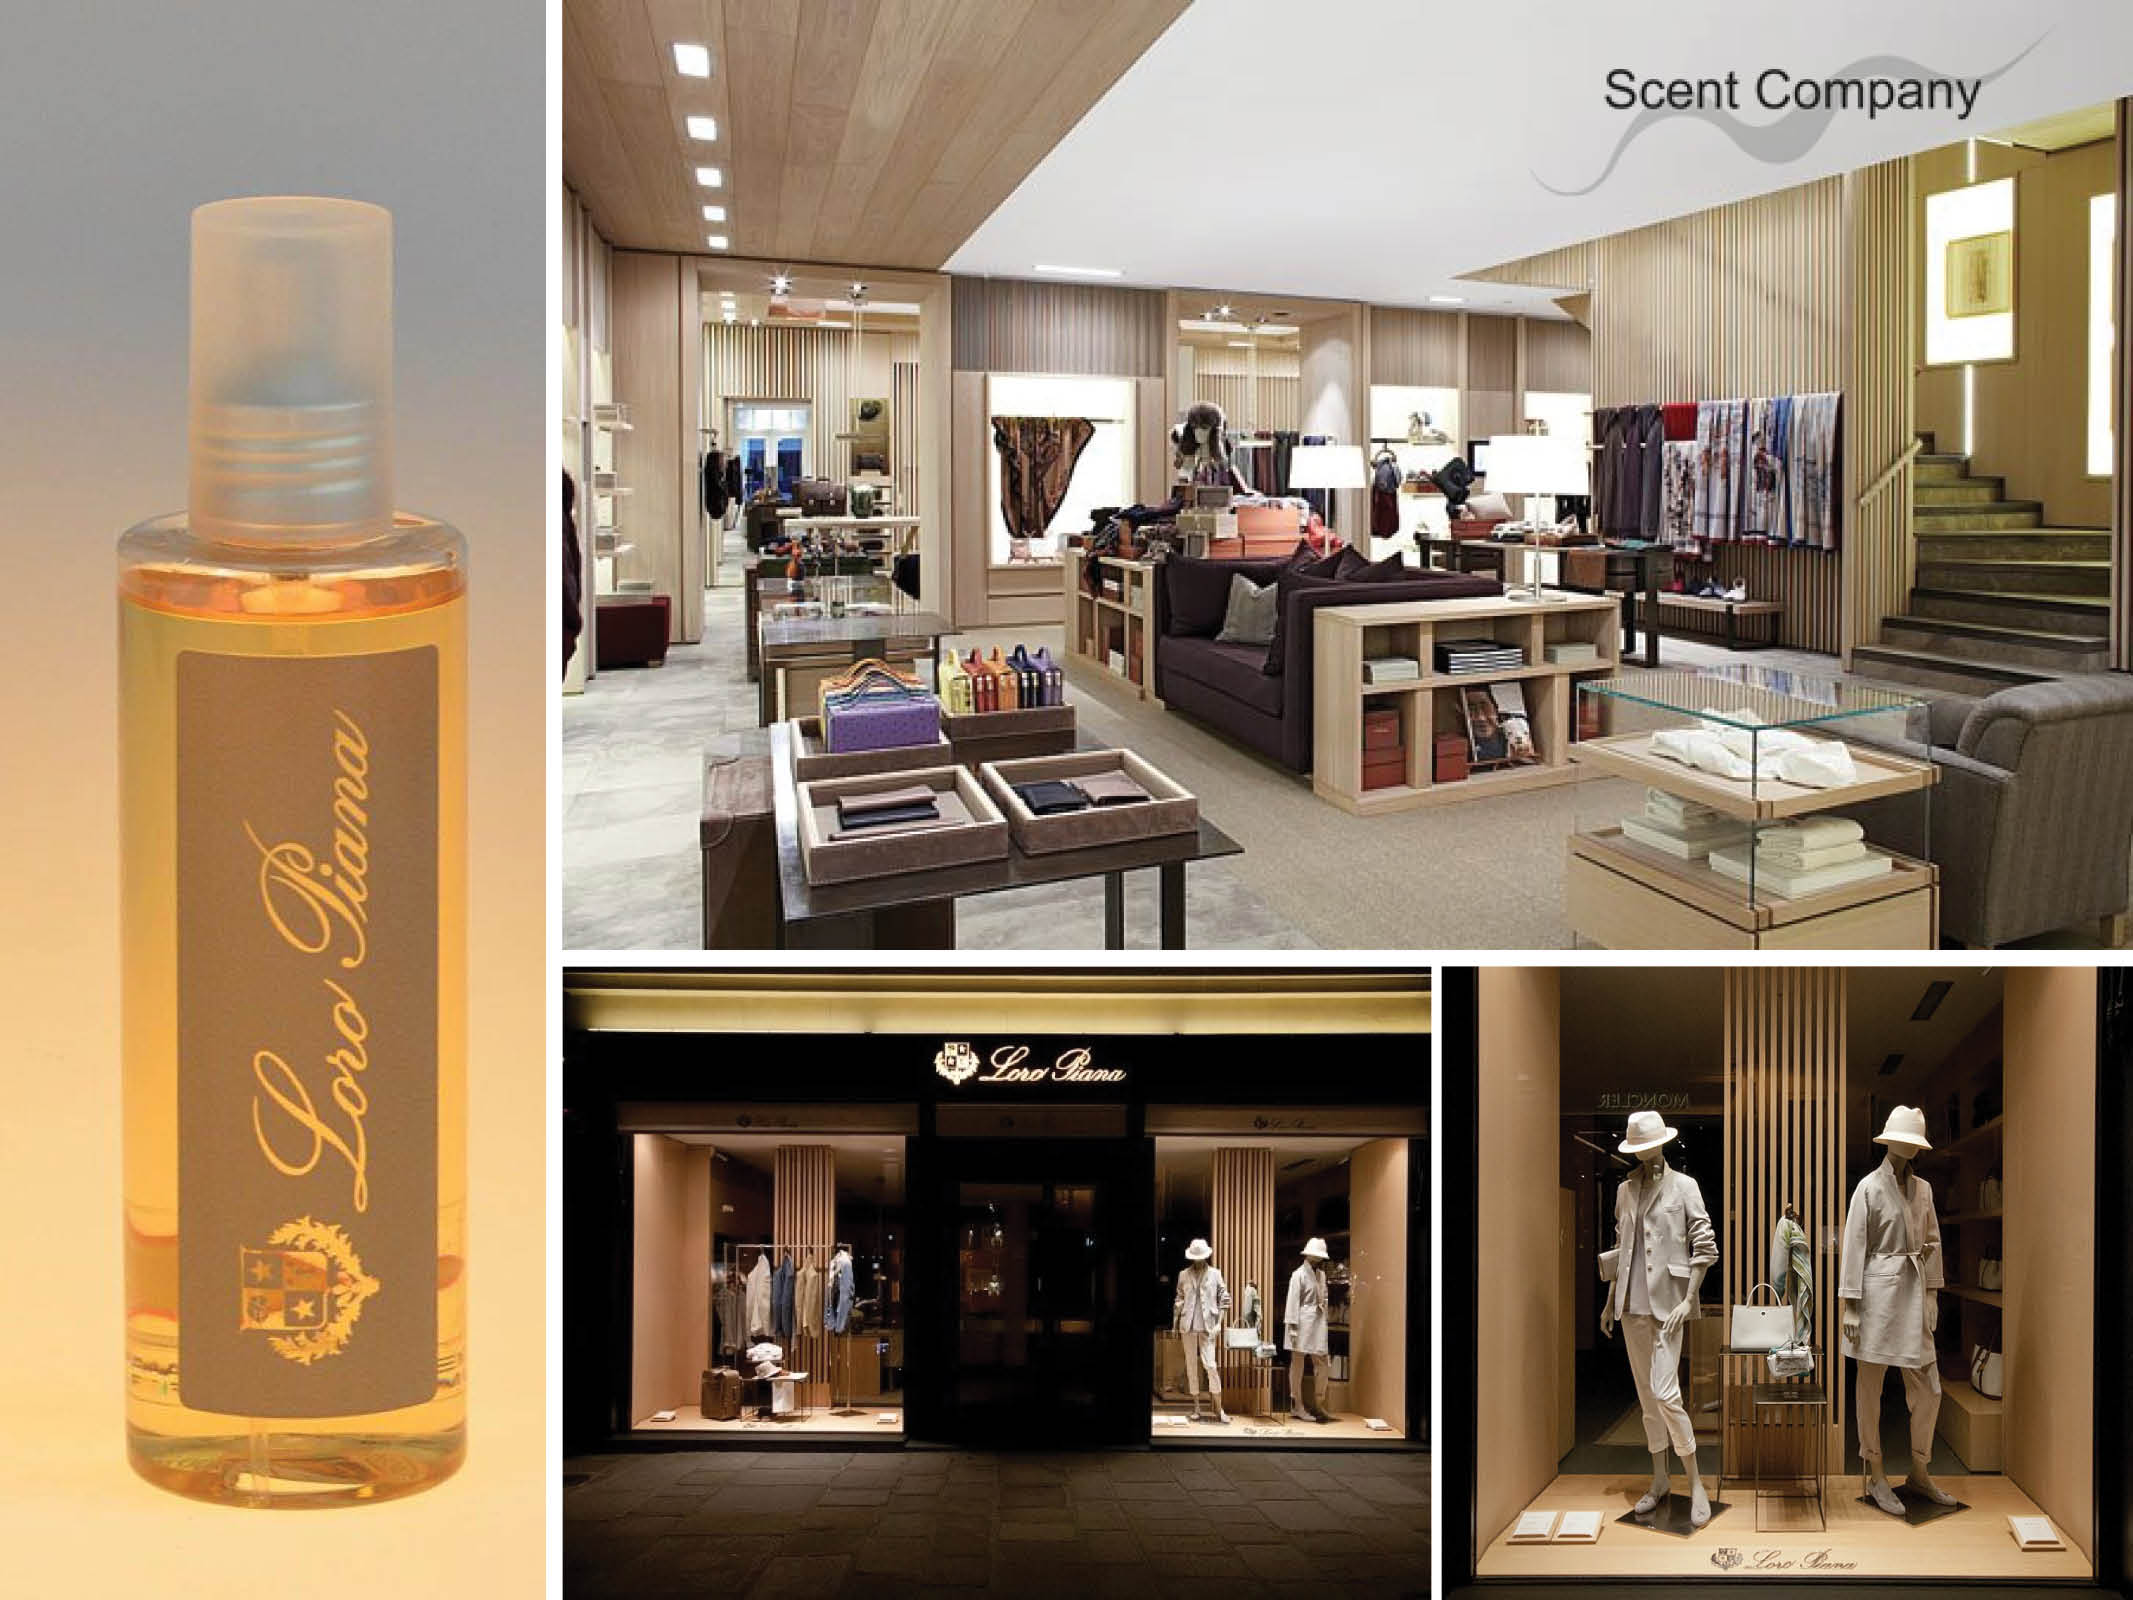 Bul-Bo Soft will be exclusively available in Loro Piana stores and